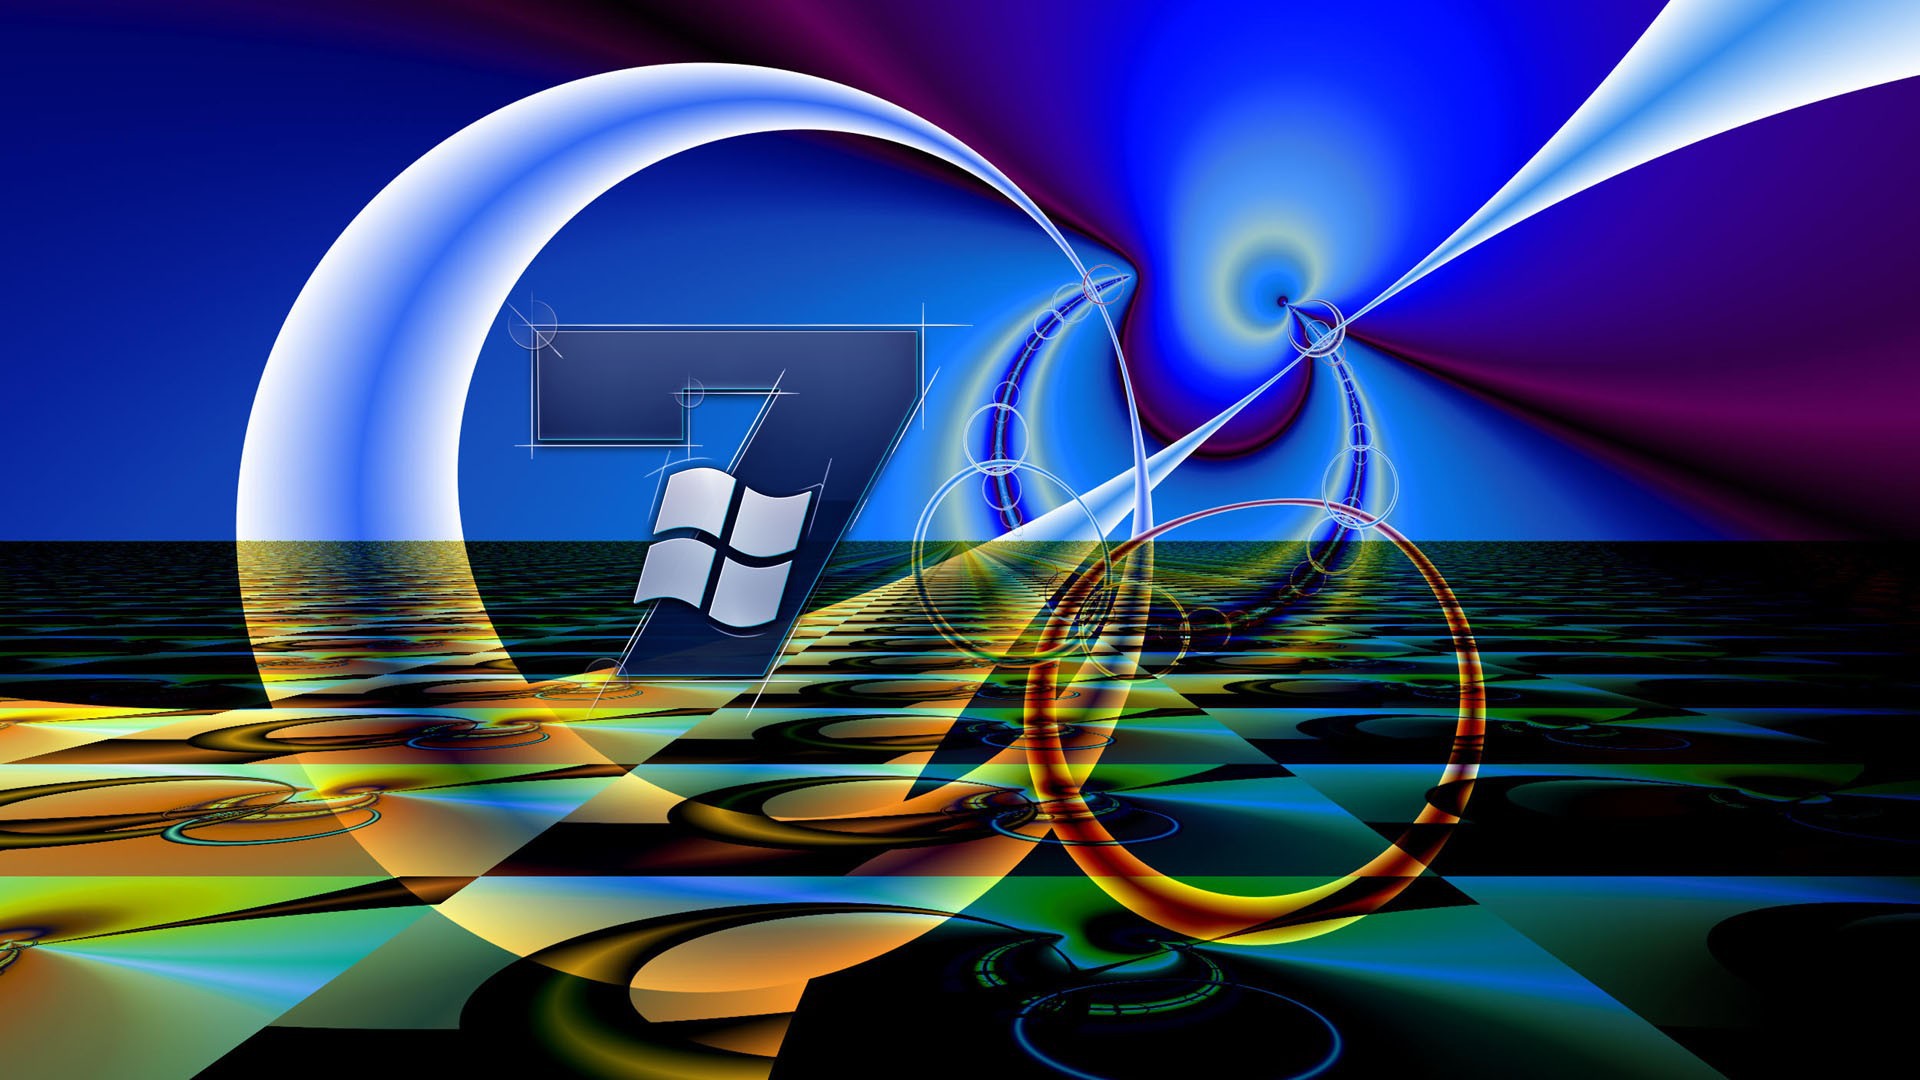 Microsoft Windows 7 wallpapers and images - wallpapers ...